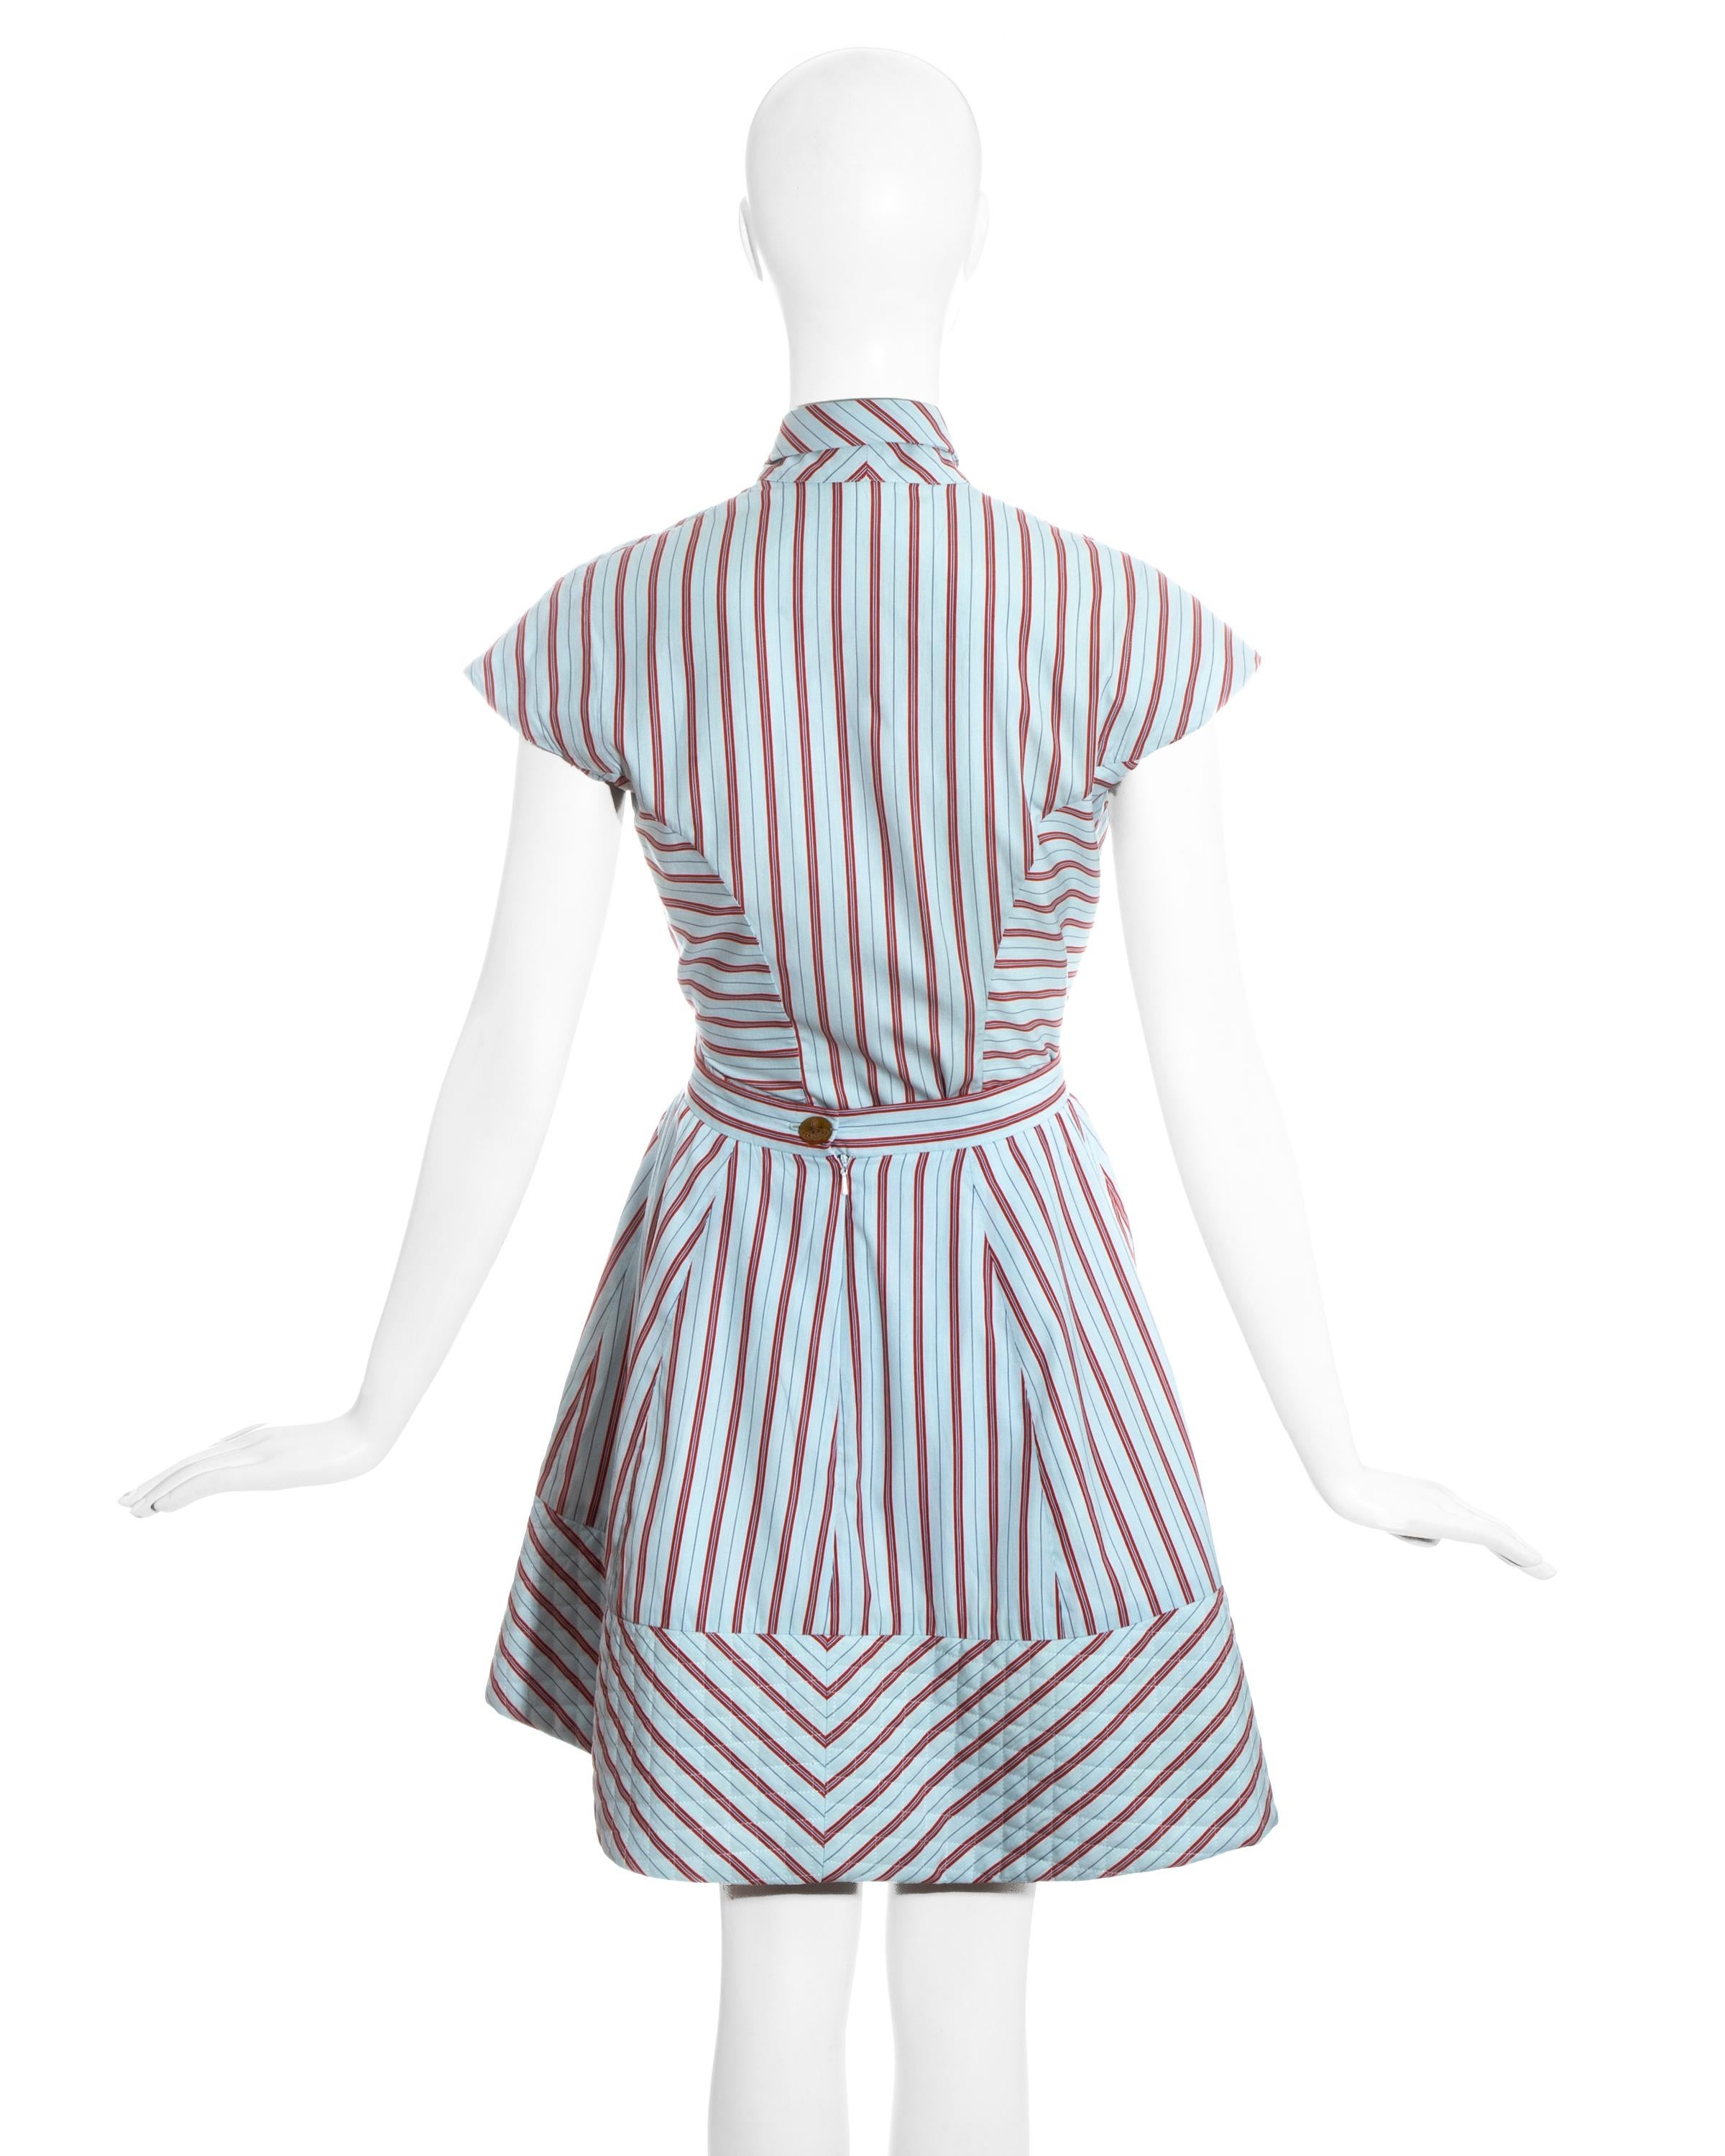 Gray Vivienne Westwood blue and red striped skirt, blouse and tie ensemble ss 1996 For Sale